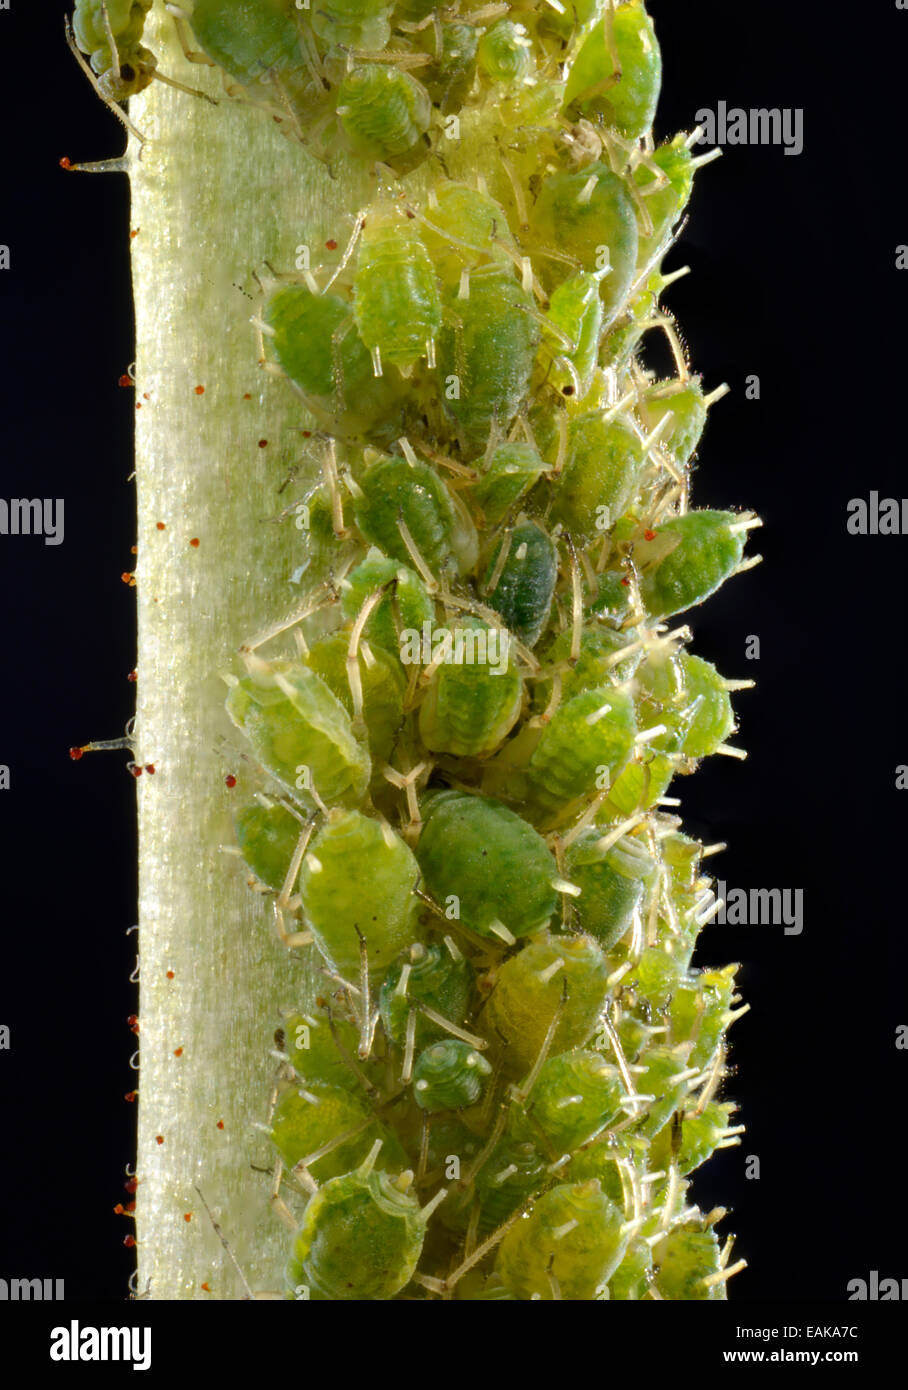 Colony of small Permanent Currant Aphids (Aphidula schneideri), pests, macro shot, Baden-Württemberg, Germany Stock Photo